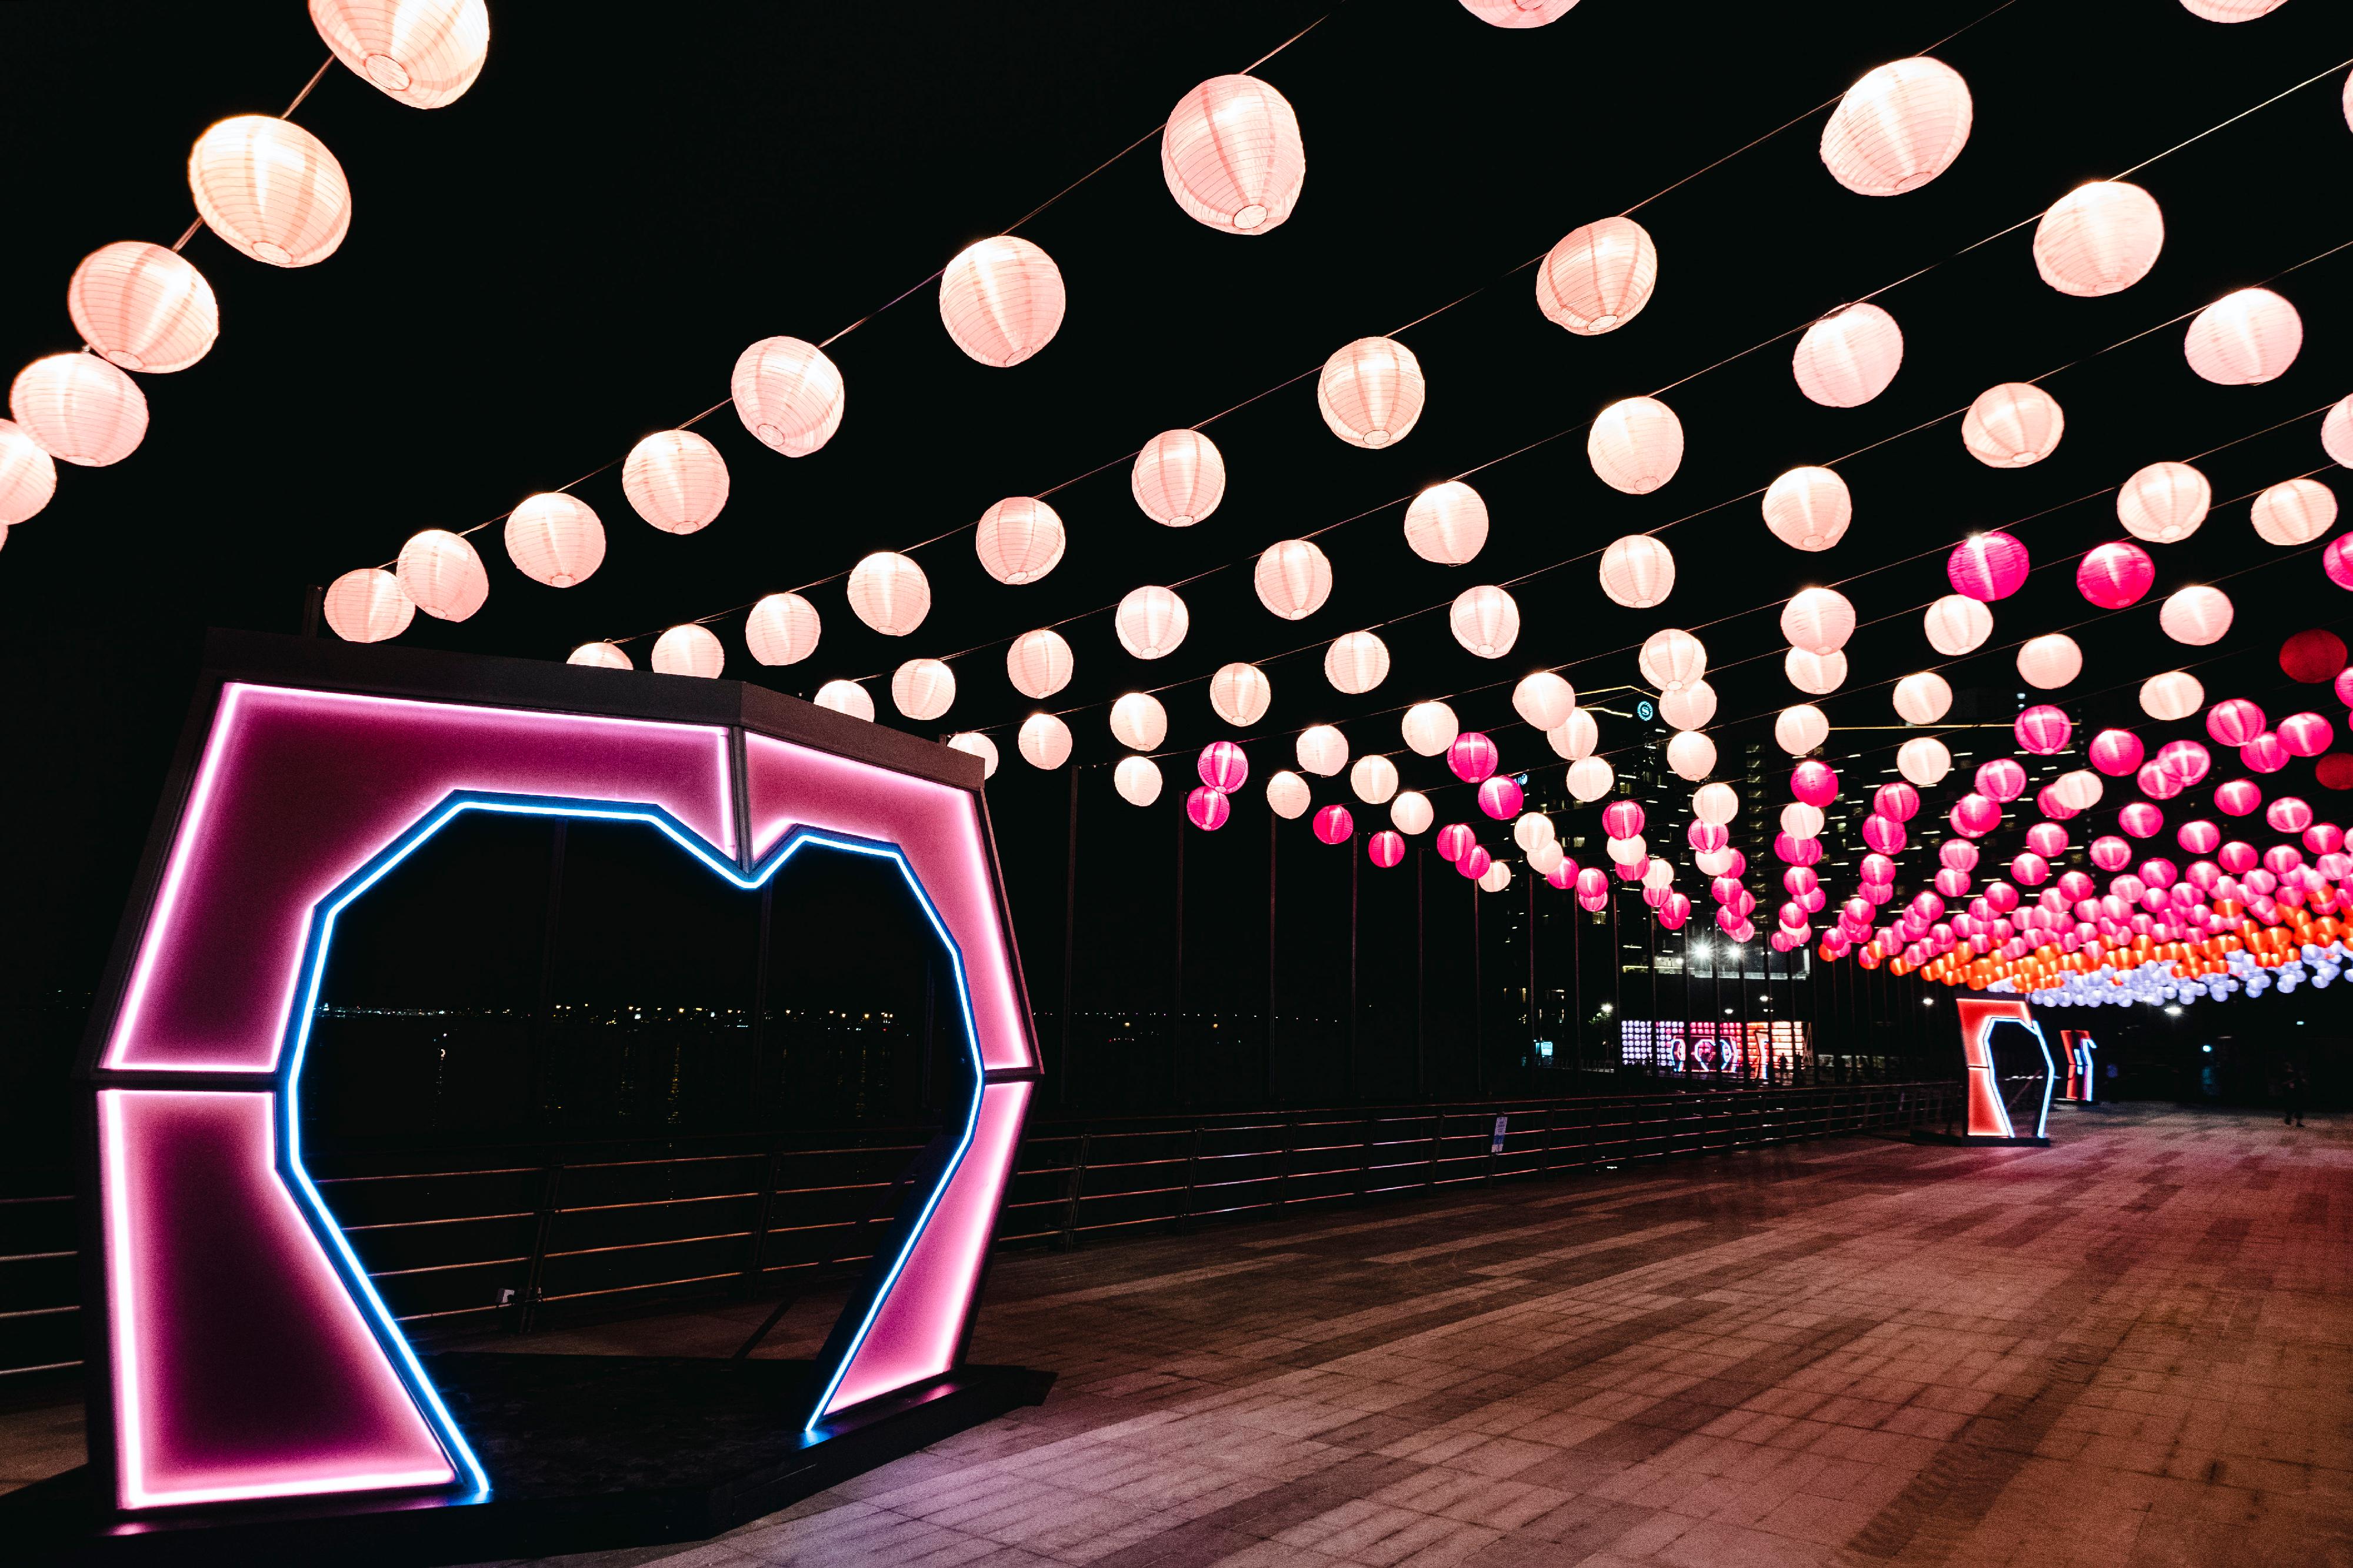 The Sustainable Lantau Office under the Civil Engineering and Development Department will organise the "Love and Reunion" Lantern Festival at Tung Chung East Promenade from tomorrow (September 2) to September 13. Photo shows heart-shaped neon arches along the promenade.